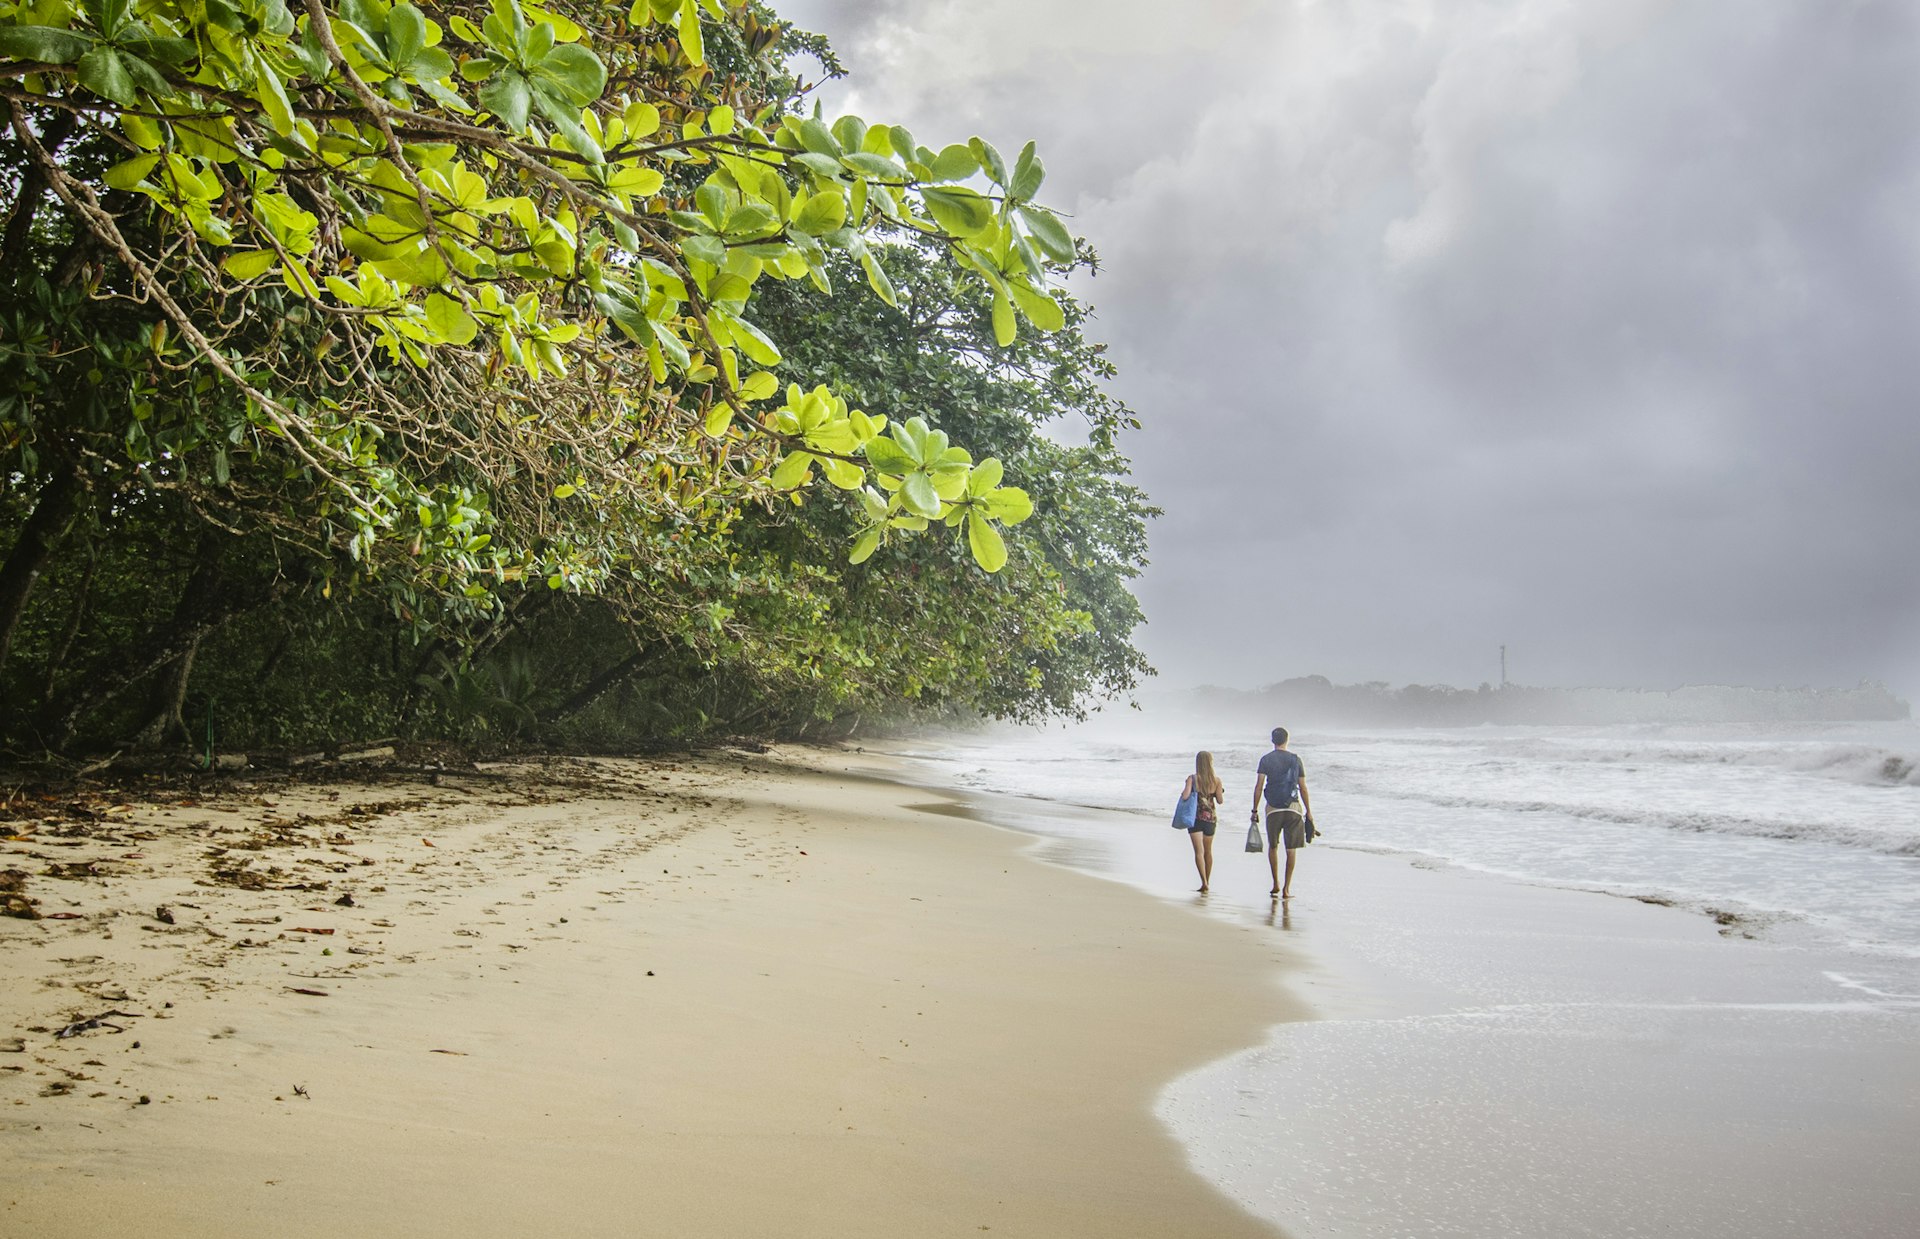 Two people walk along a sandy beach on a stormy day